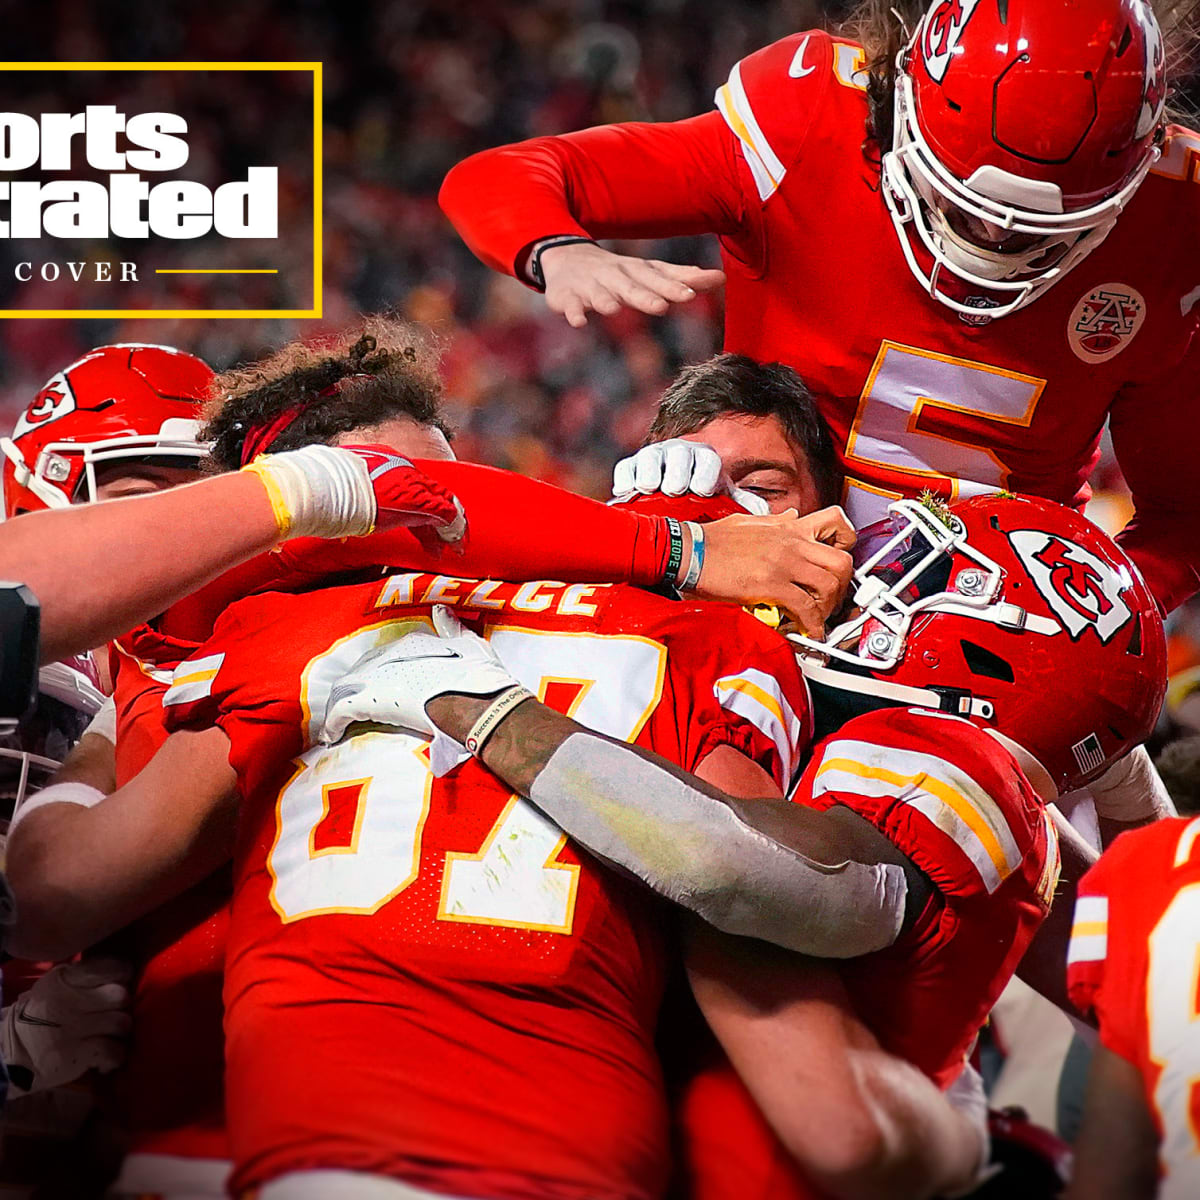 Patrick Mahomes' greatness on display again as Chiefs beat Bills to get to Super  Bowl LV